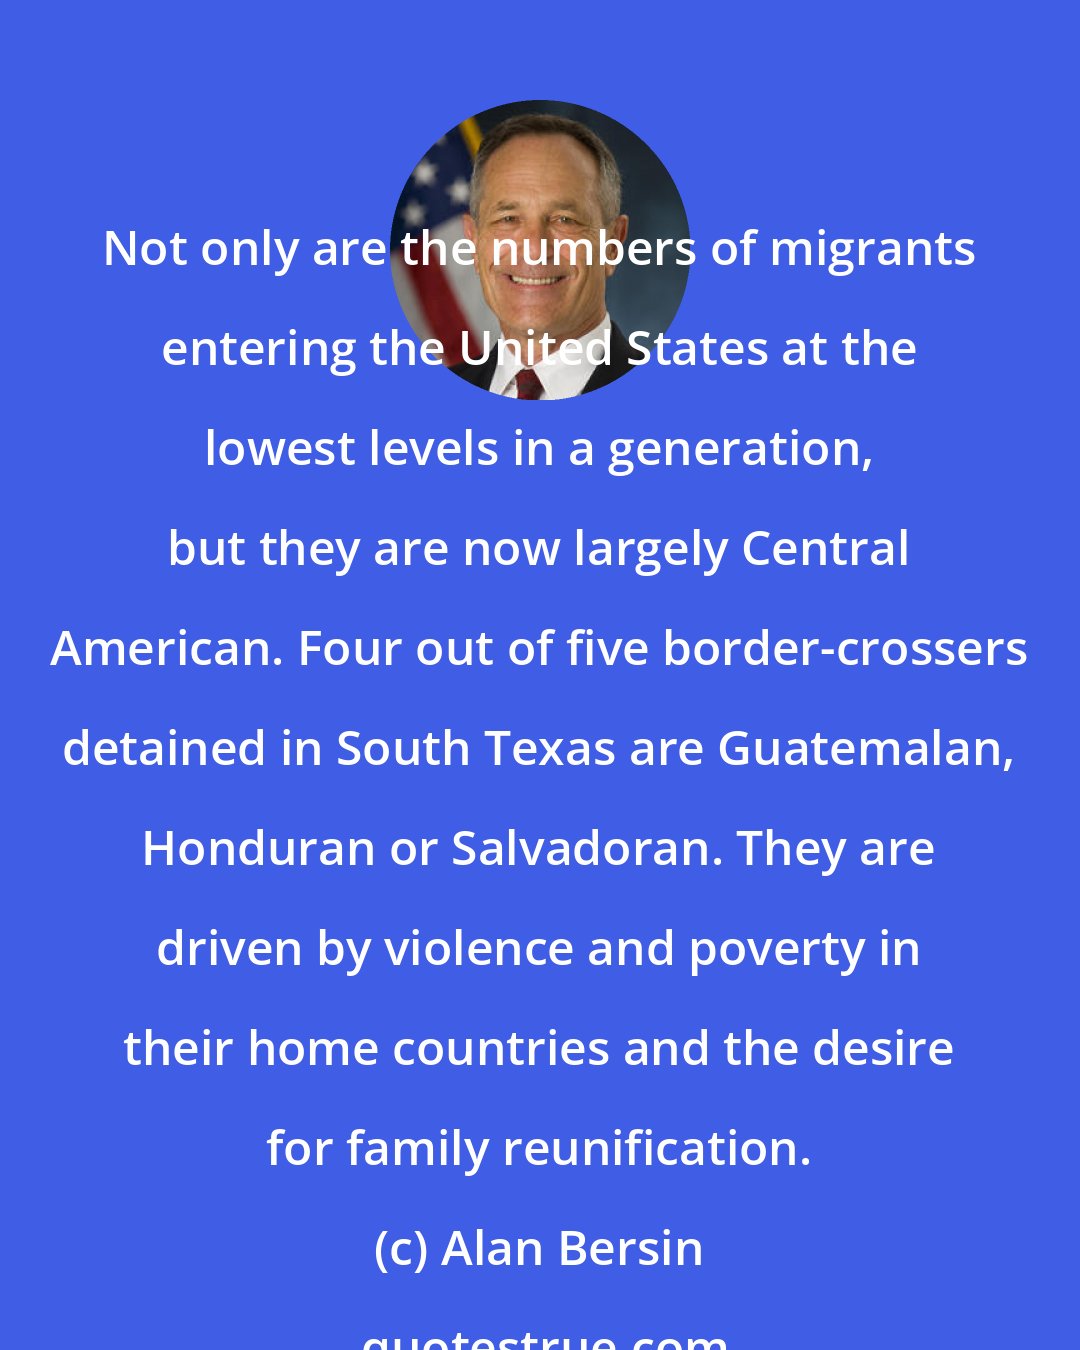 Alan Bersin: Not only are the numbers of migrants entering the United States at the lowest levels in a generation, but they are now largely Central American. Four out of five border-crossers detained in South Texas are Guatemalan, Honduran or Salvadoran. They are driven by violence and poverty in their home countries and the desire for family reunification.